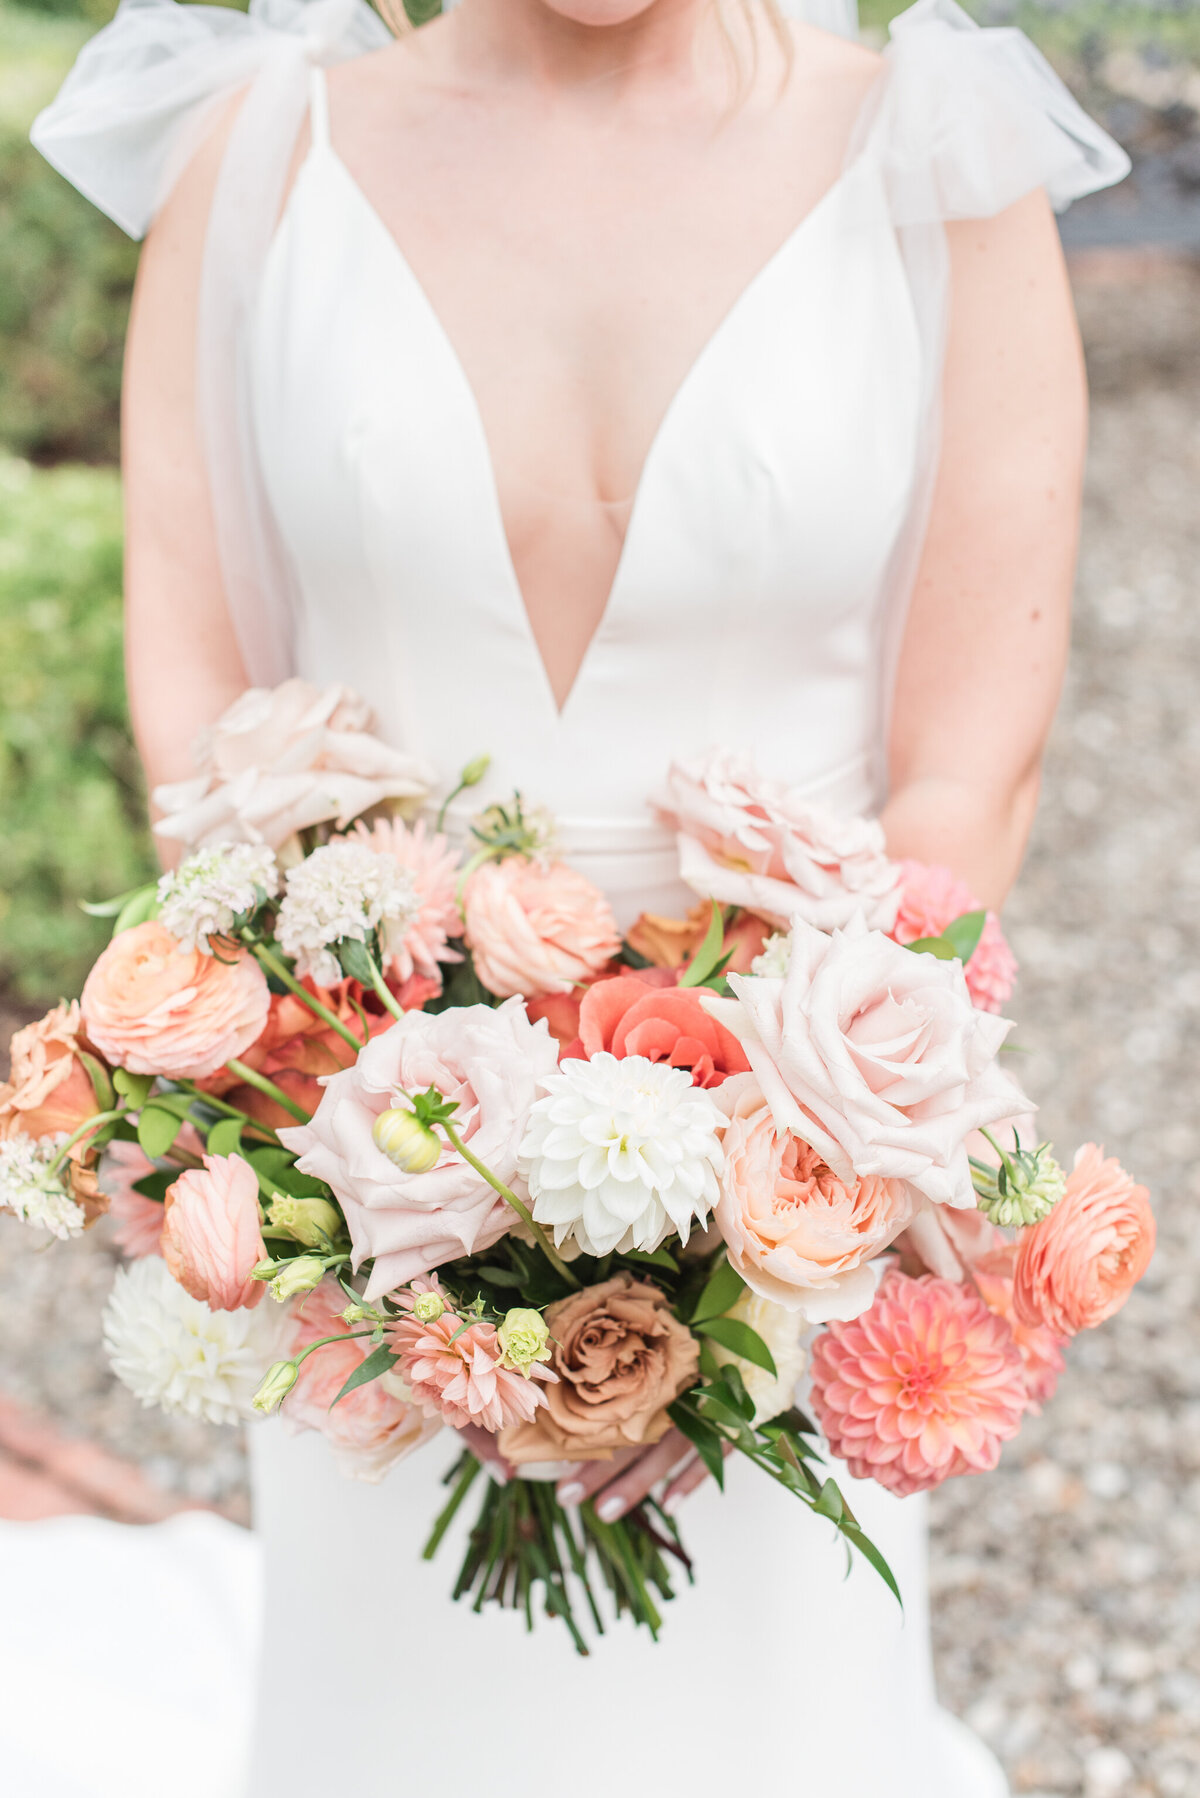 bride holding bouquet of roses dahlias and ranunculus in peach and blush color